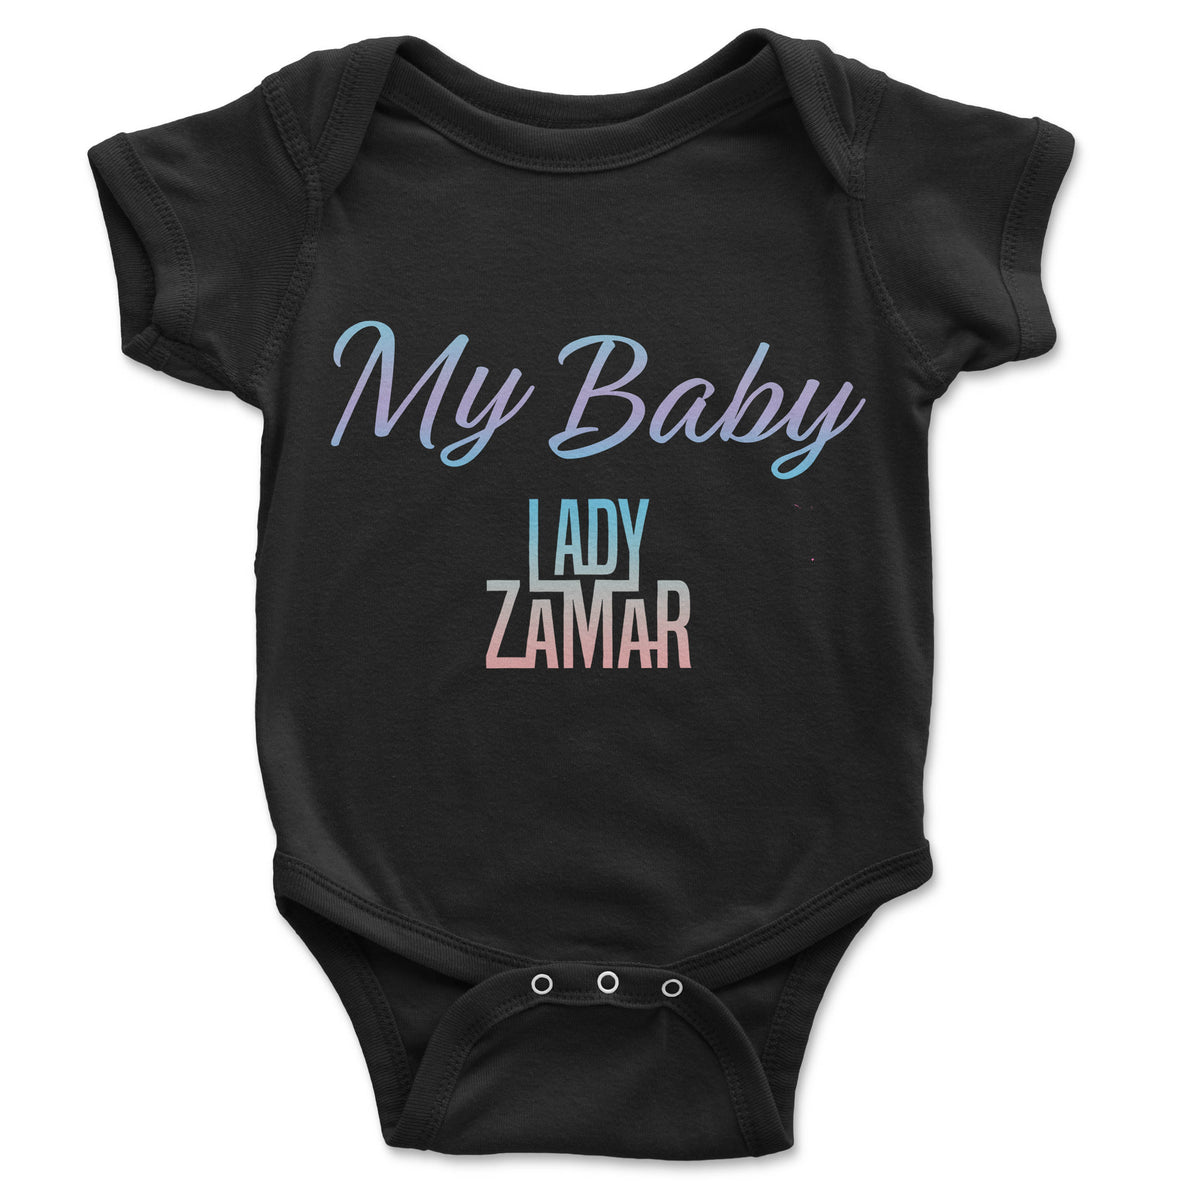 Lady Zamar - (My baby) Baby Grower - OnlyArtistsOfficial